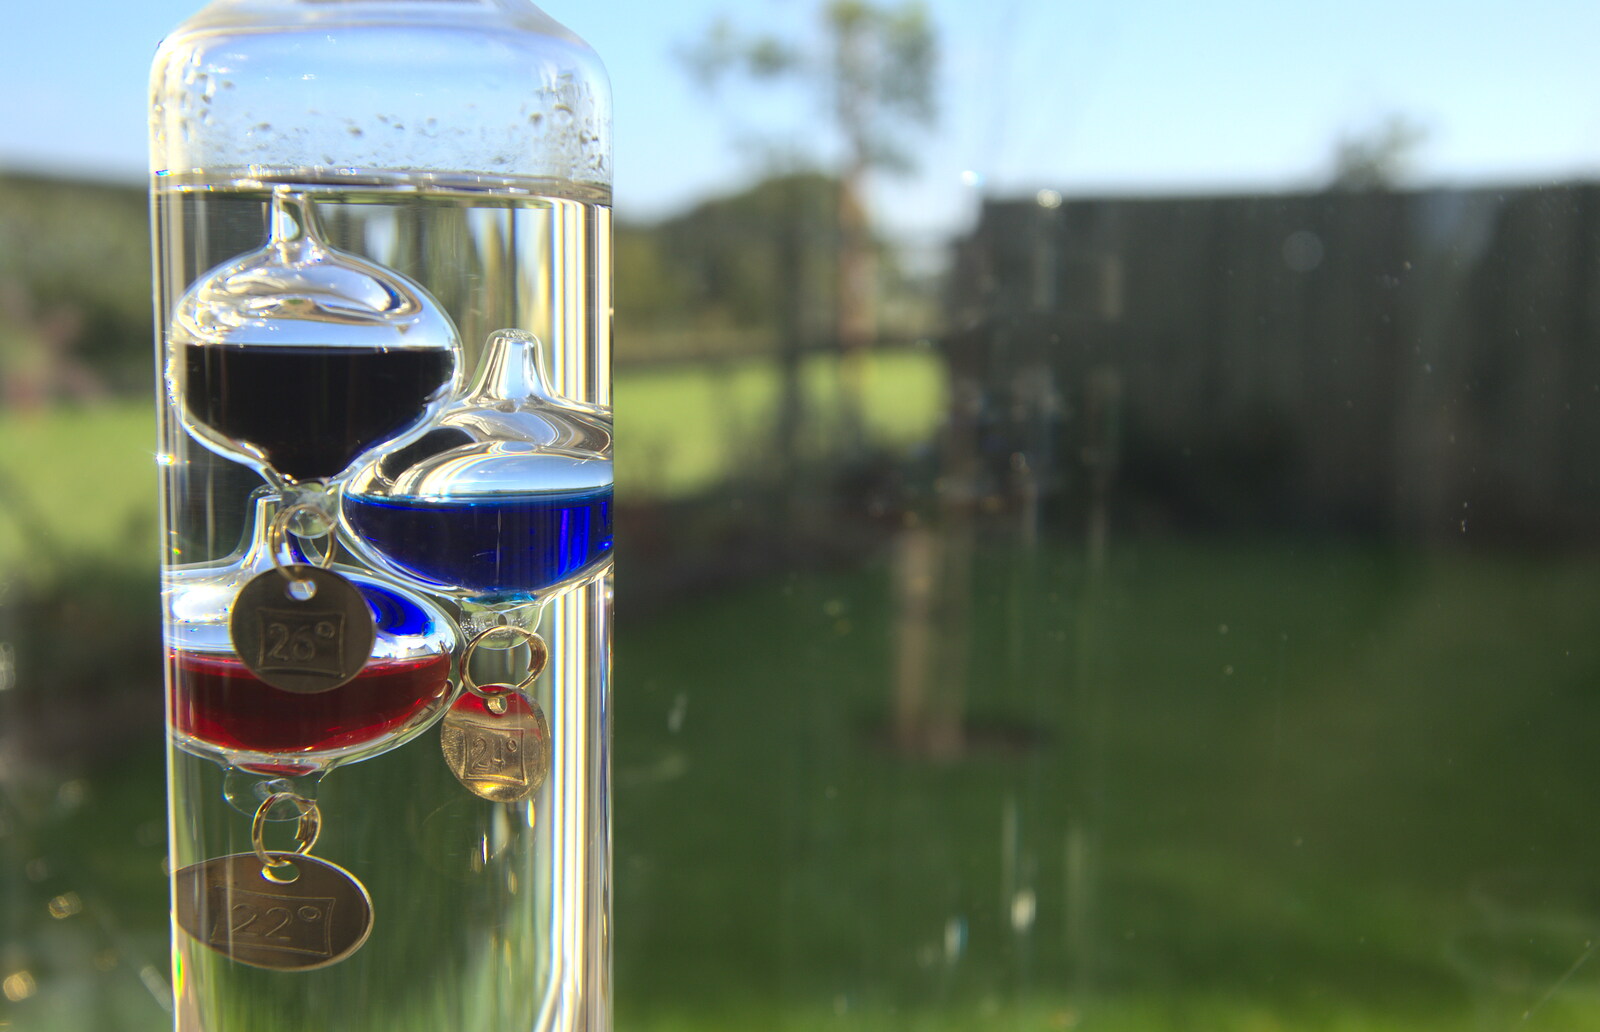 A Galilean thermometer from A Few Days in Spreyton, Devon - 26th October 2013